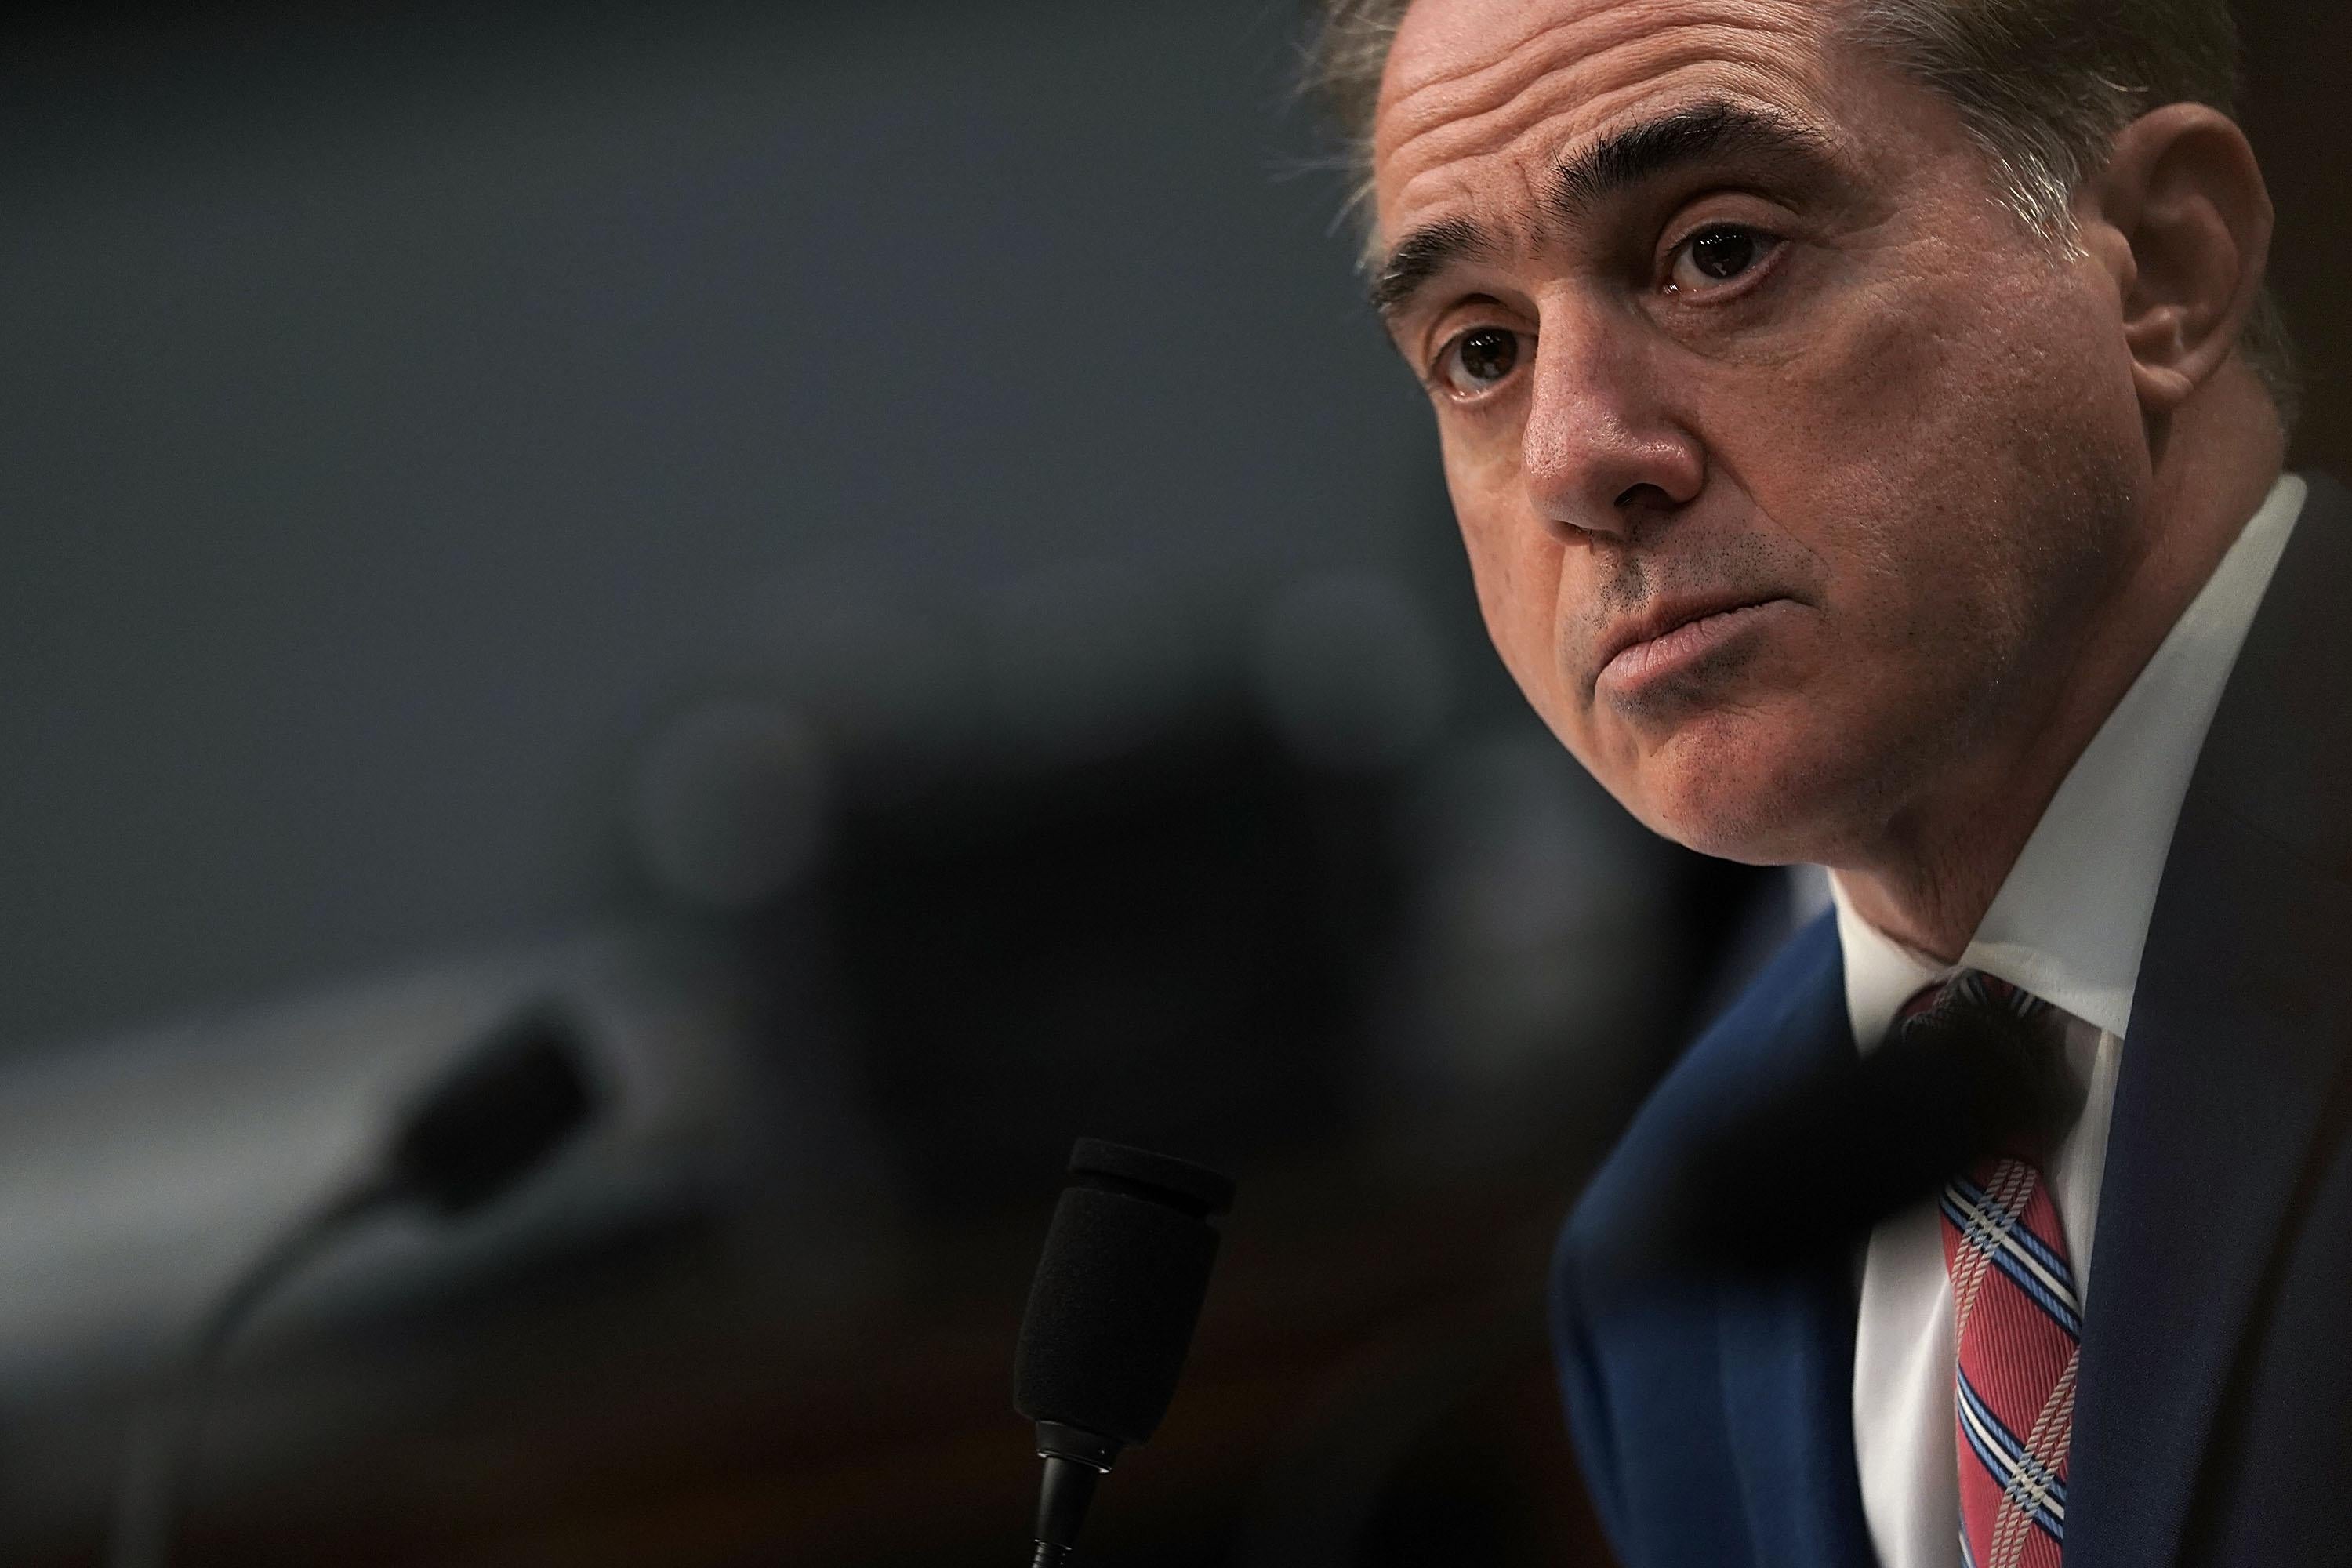 David Shulkin testifies during a hearing before the Military Construction, Veterans Affairs, and Related Agencies Subcommittee of House Appropriations Committee March 15, 2018 on Capitol Hill in Washington, D.C. 